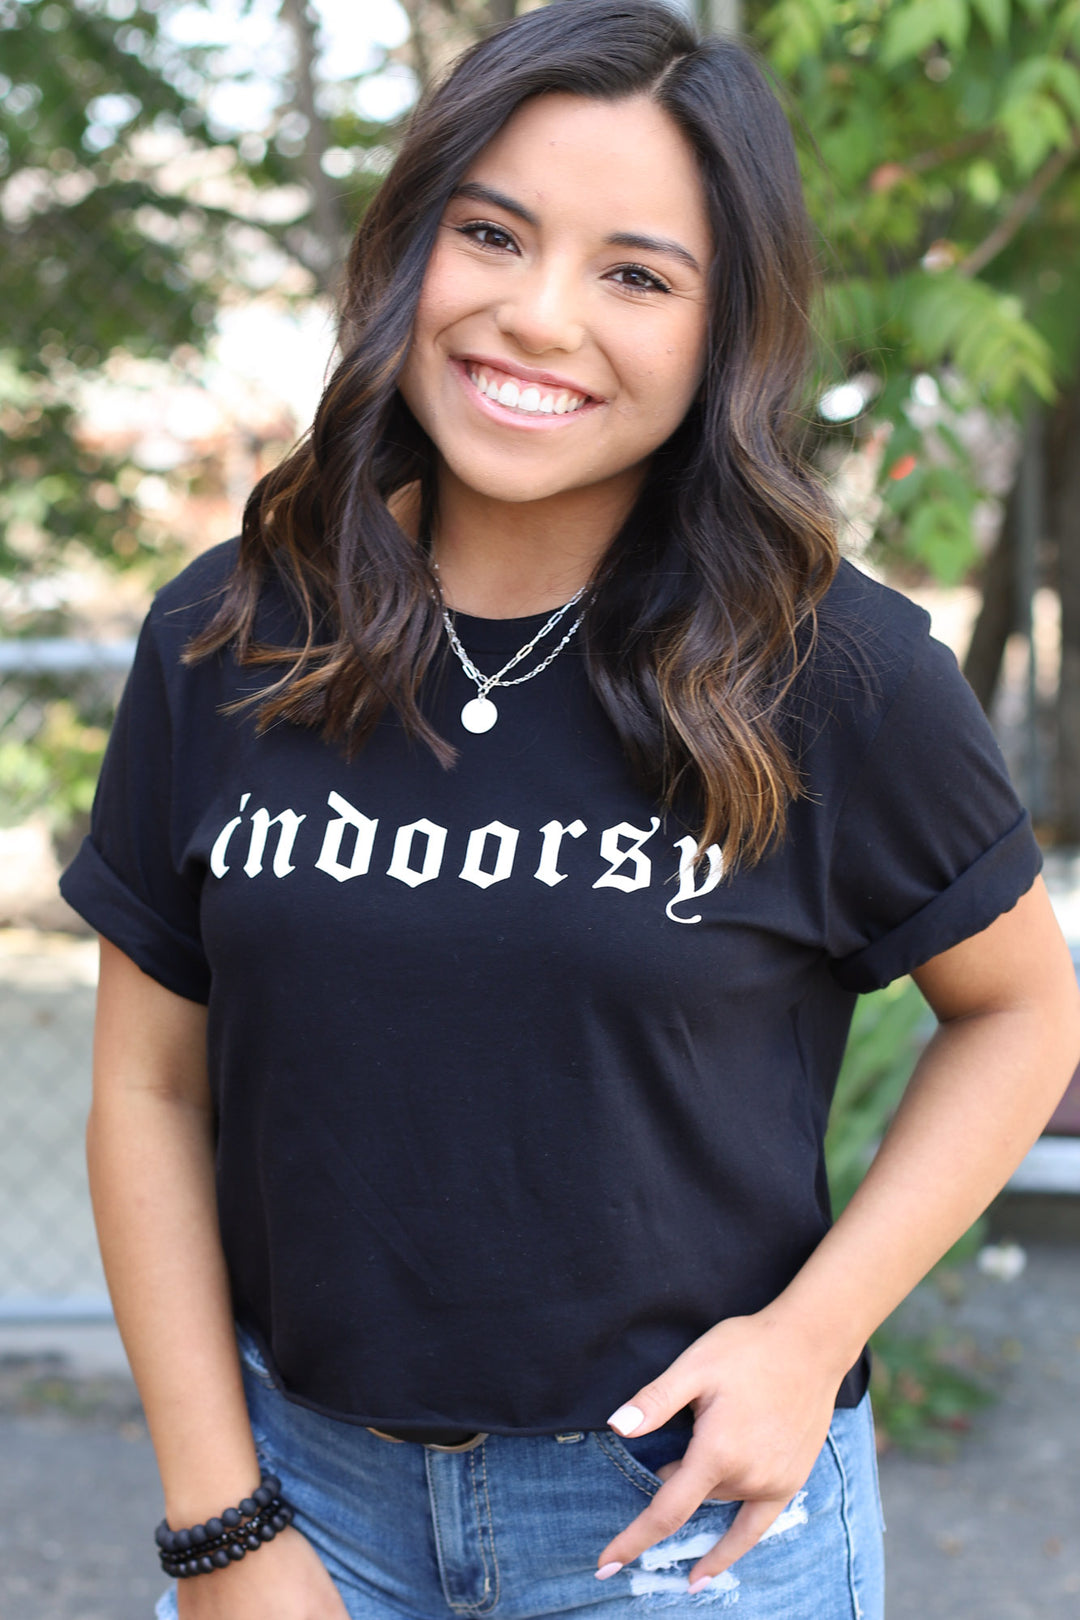 Indoorsey Cropped Tee: Black - ShopSpoiled